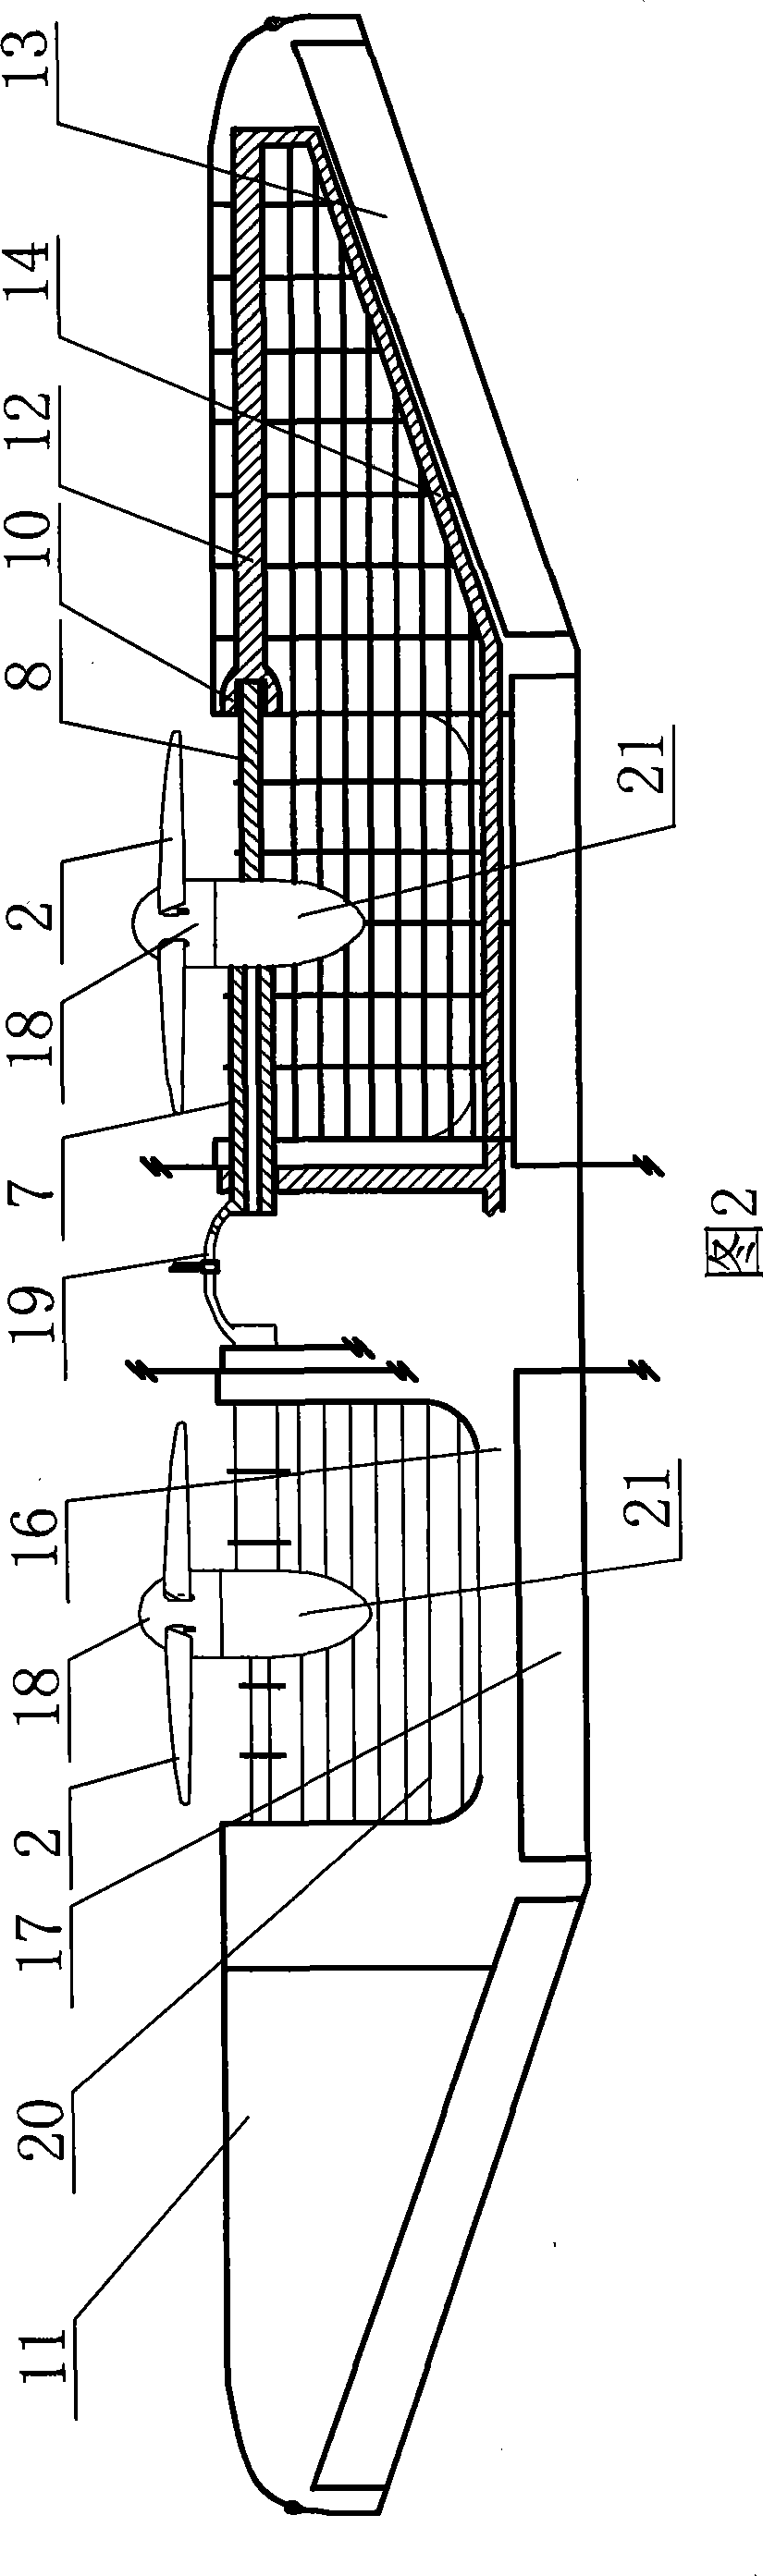 Louver type cracking composite wing